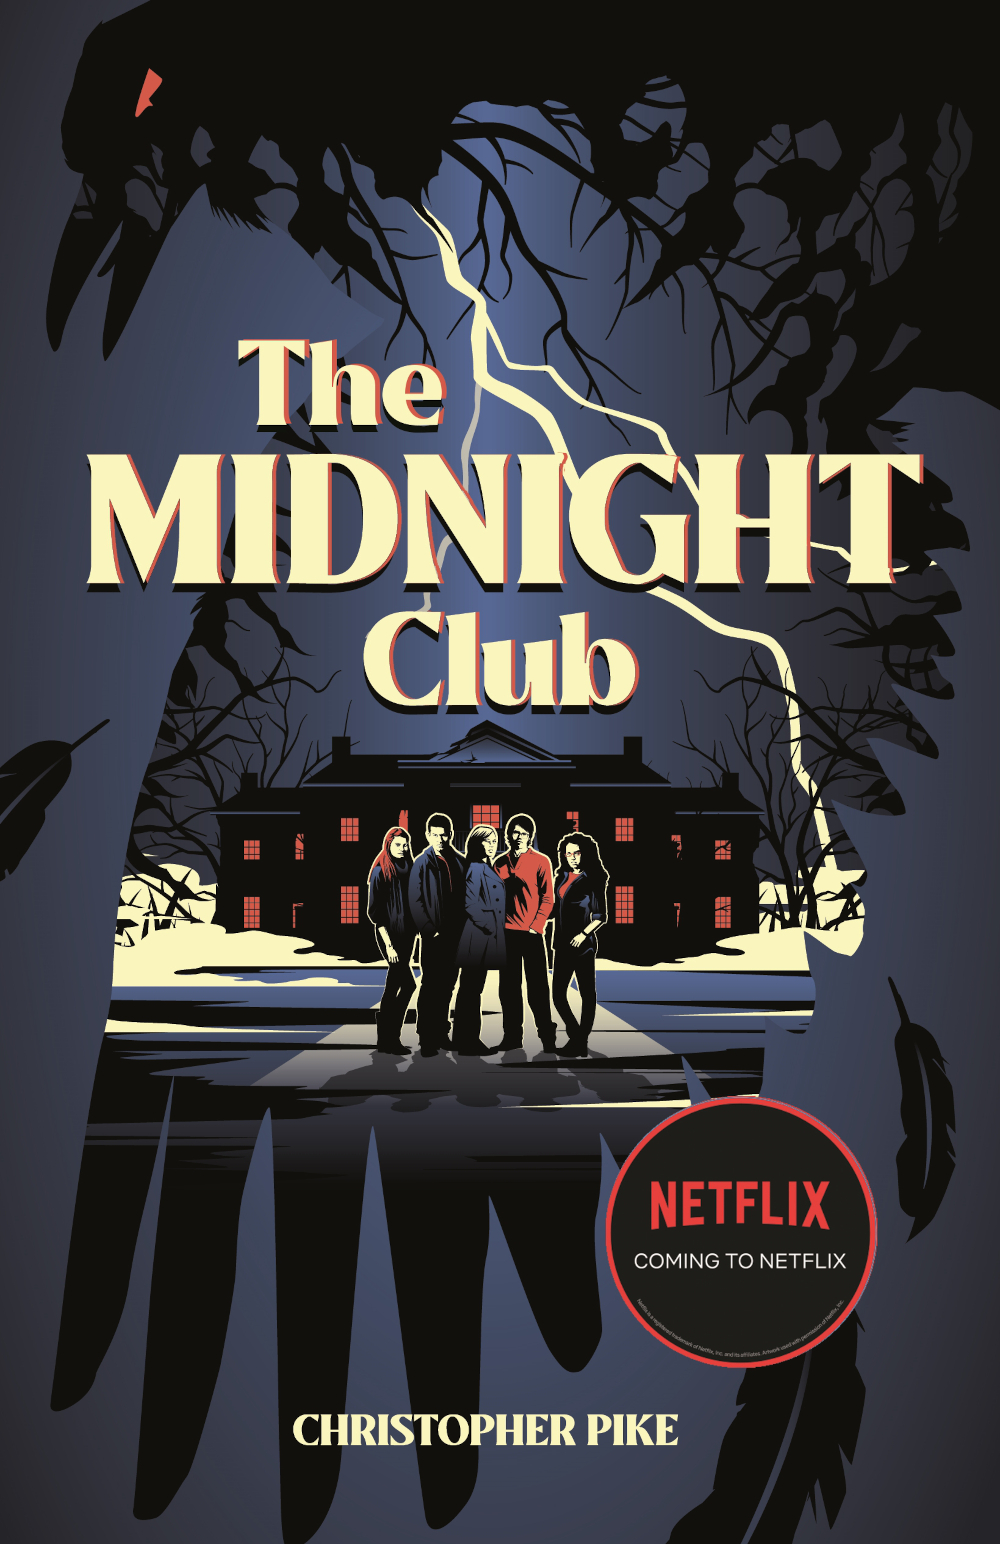 The Midnight Club book cover.